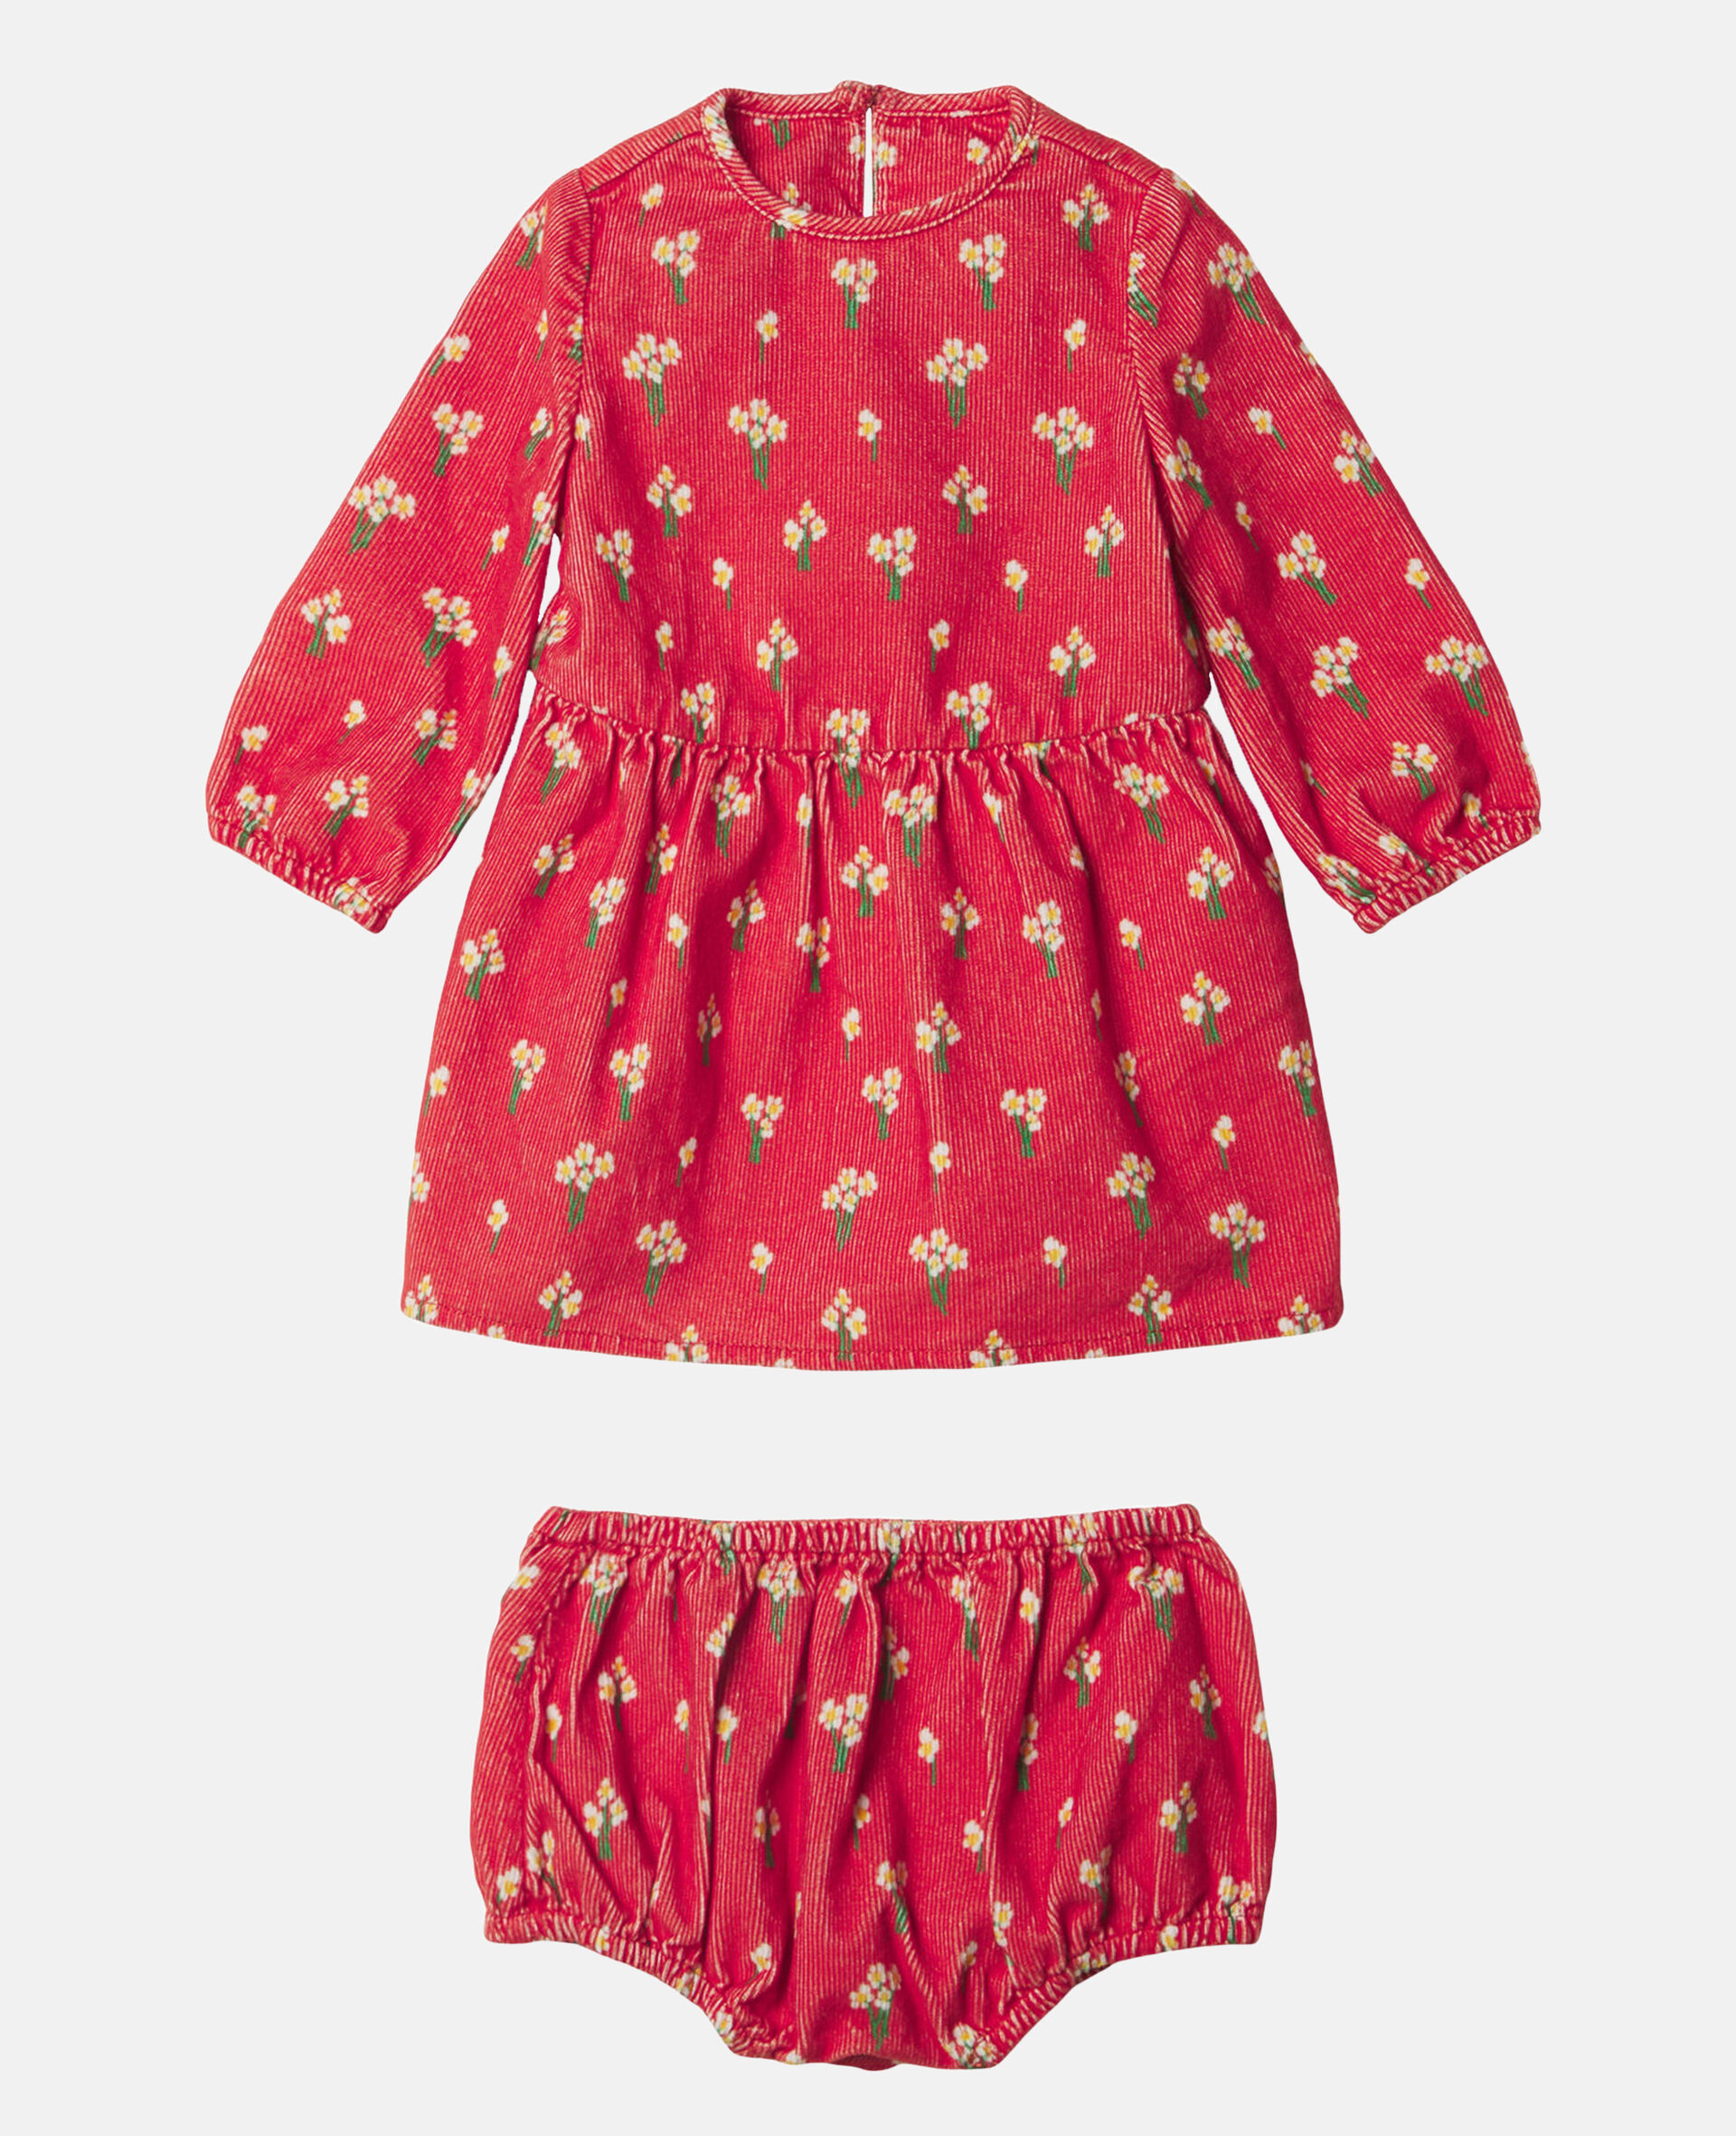 Daisy Print Corduroy Cotton Dress-Red-large image number 0